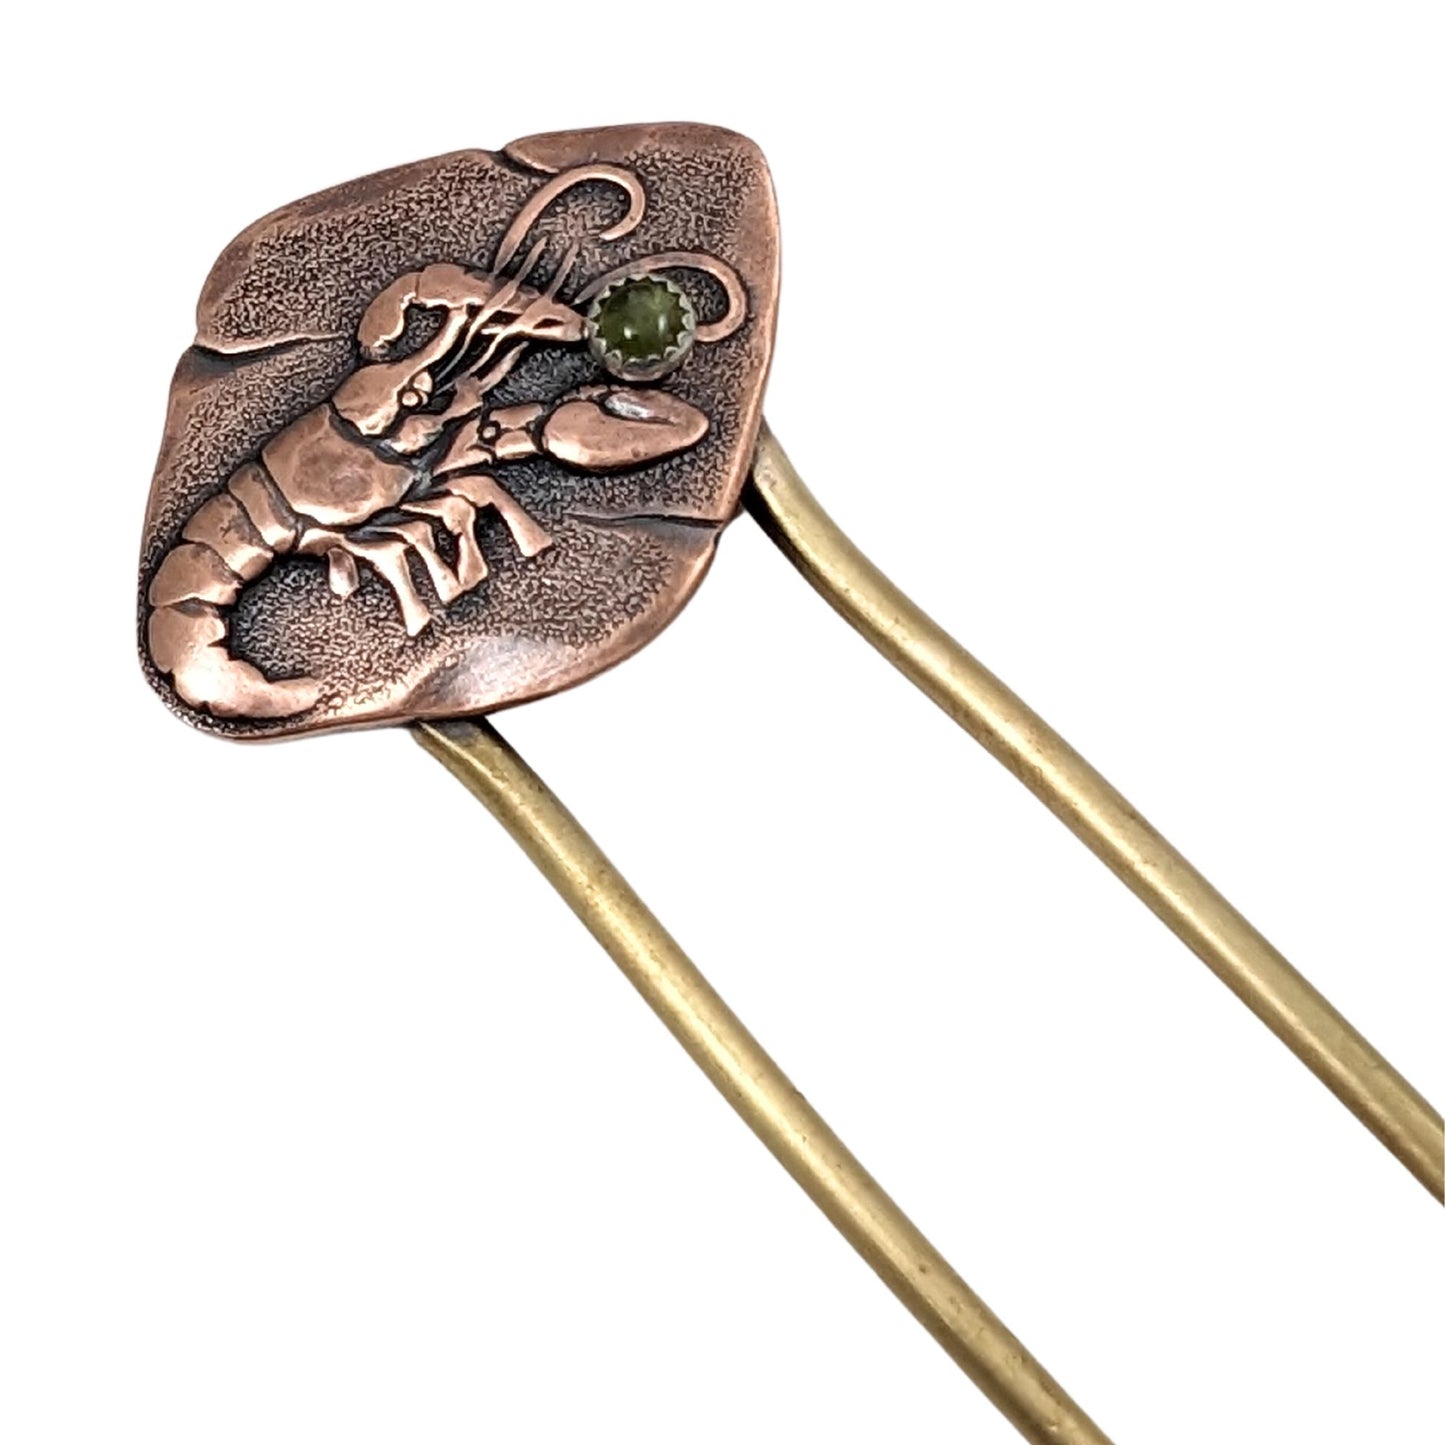 Lobster hair fork. The lobster design is an impression on a rectangular shaped piece of copper. There is a green tourmaline gemstone between the front claws.The fork is brass.